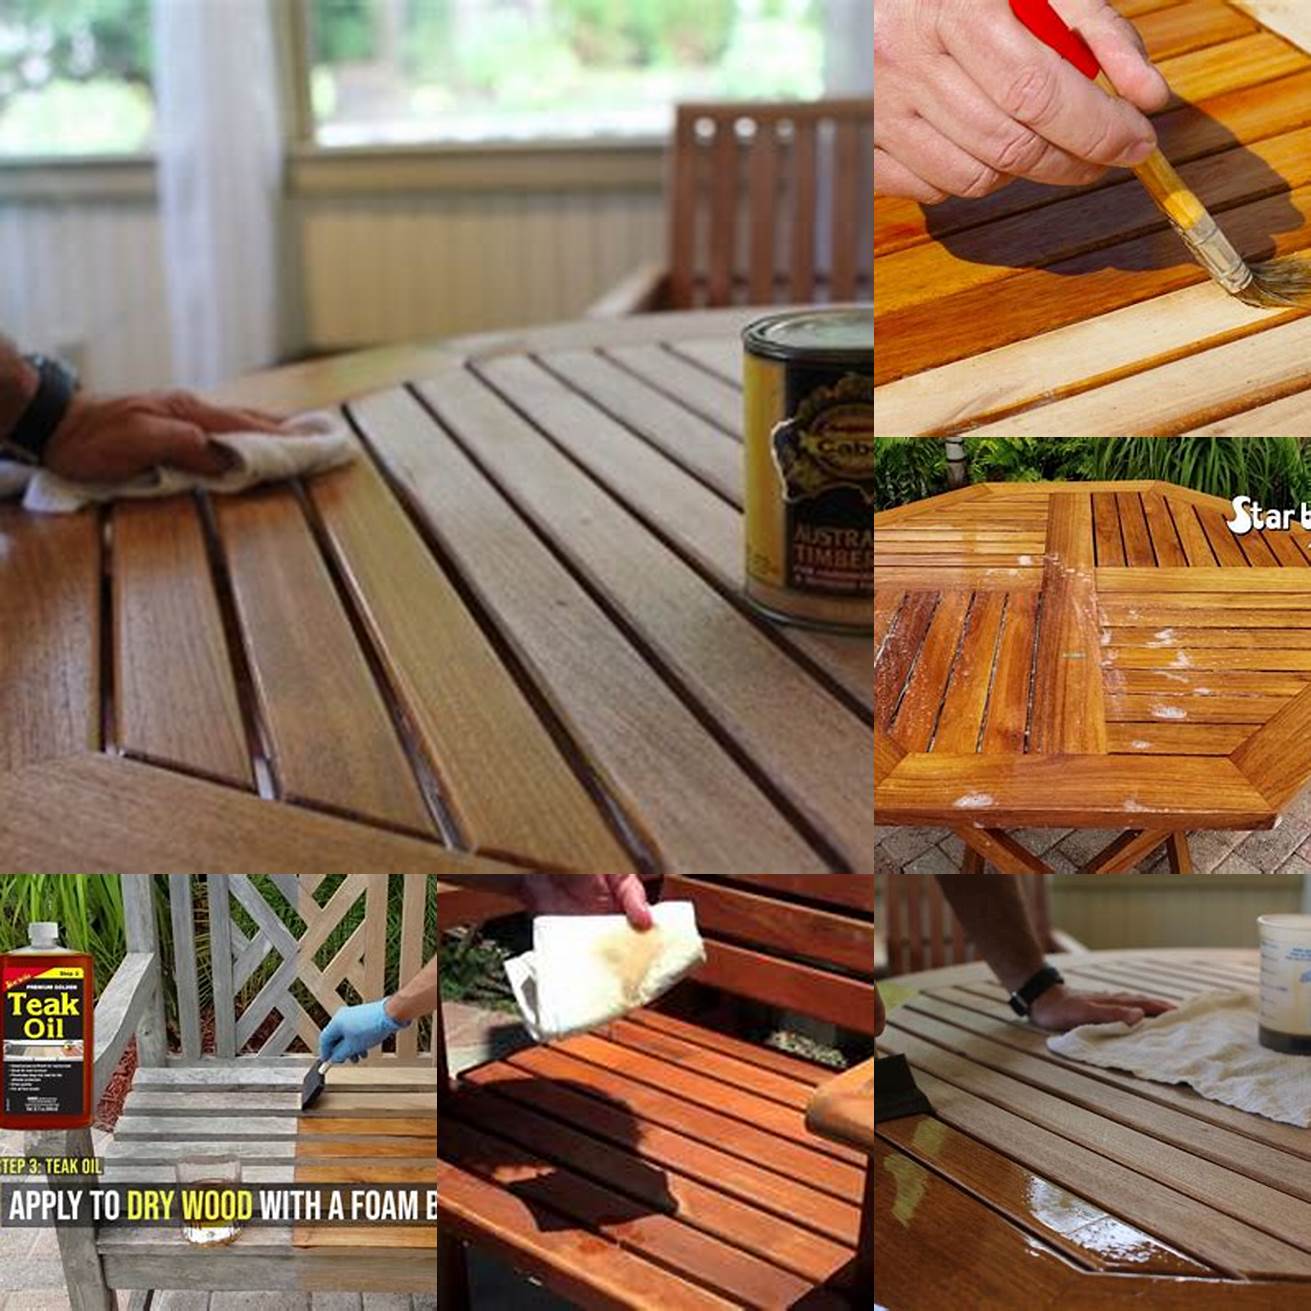 Clean the Teak Sealed with Oil